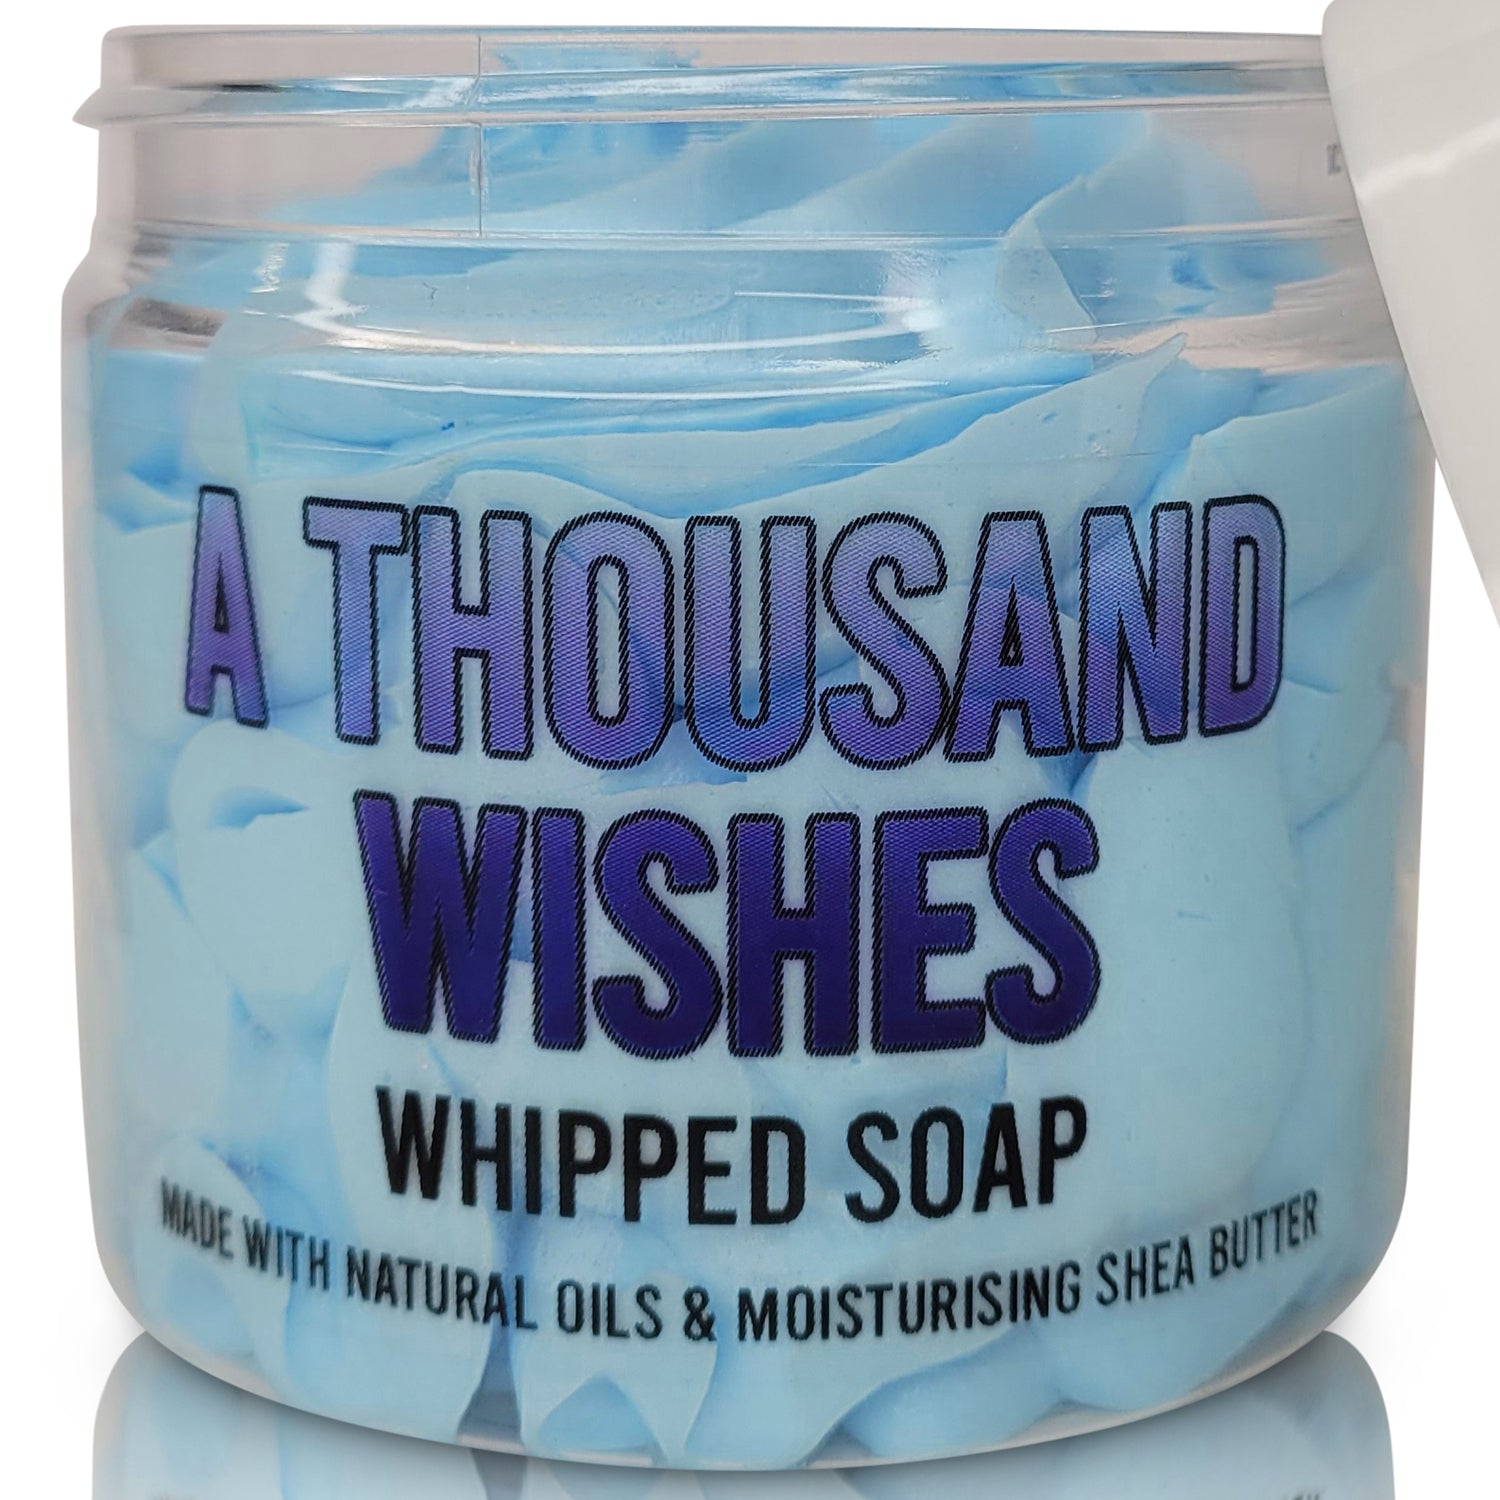 A Thousand Wishes Whipped Soap